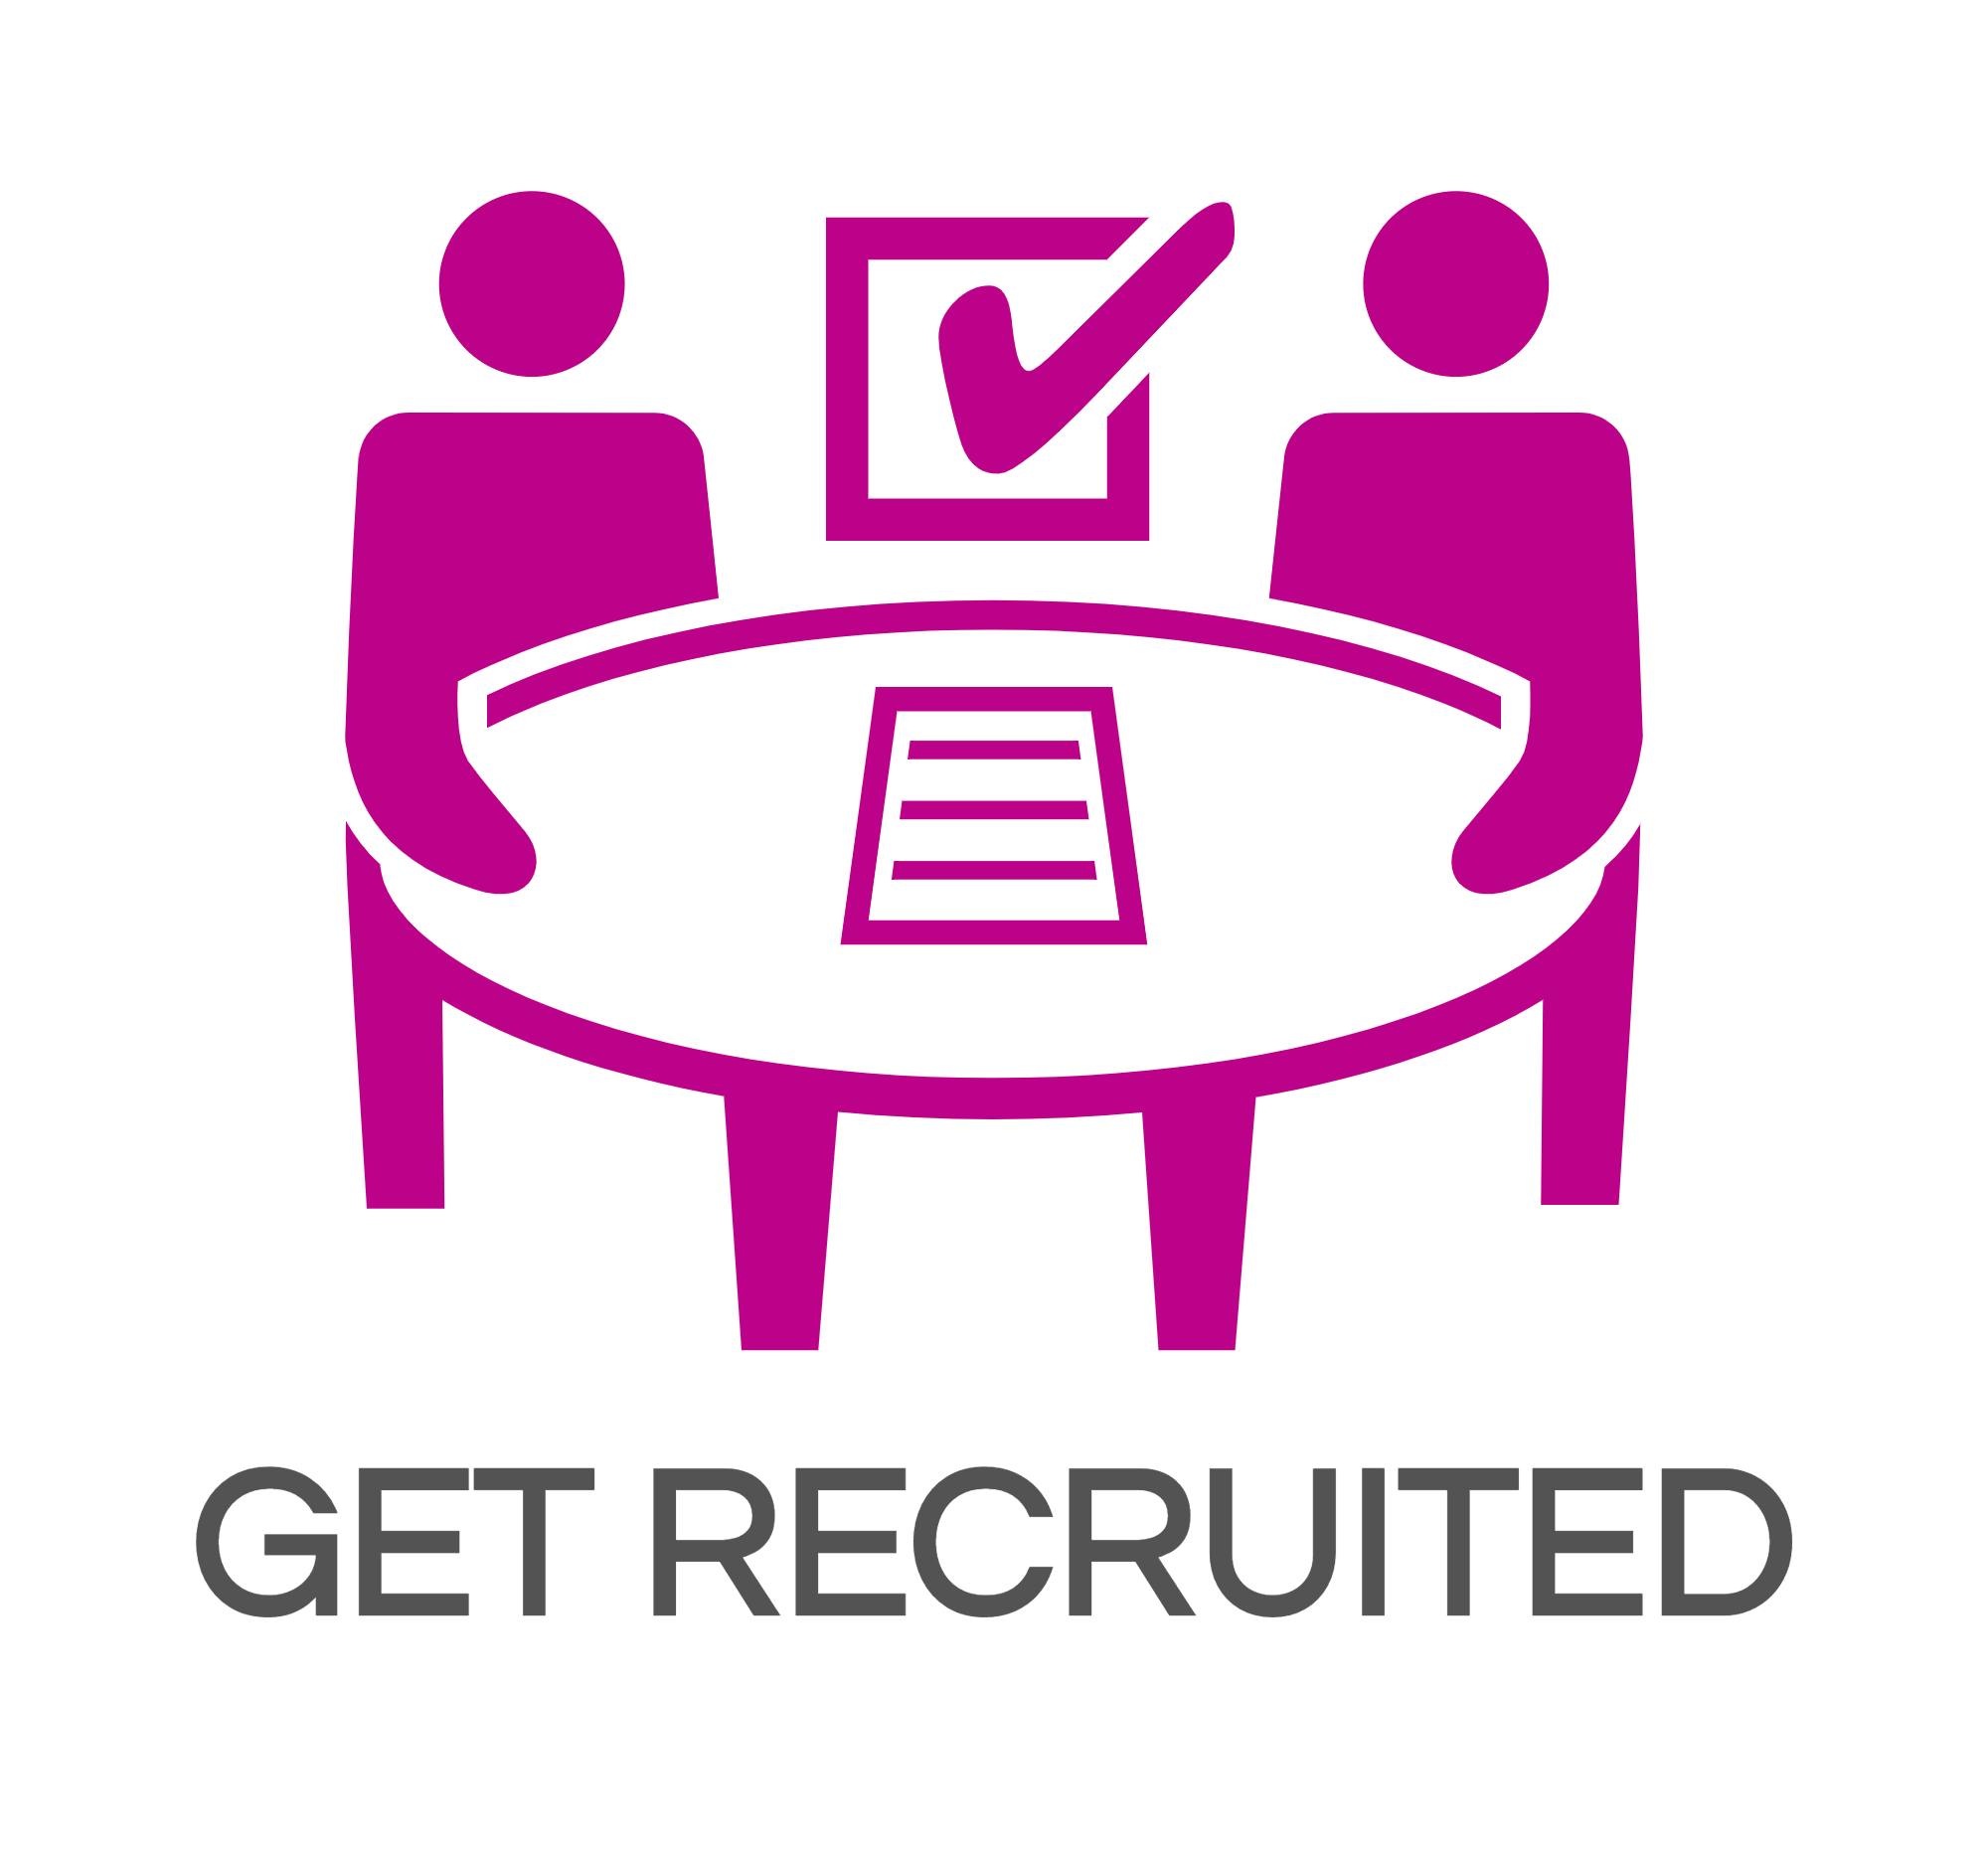 GET RECRUITED-logo.png